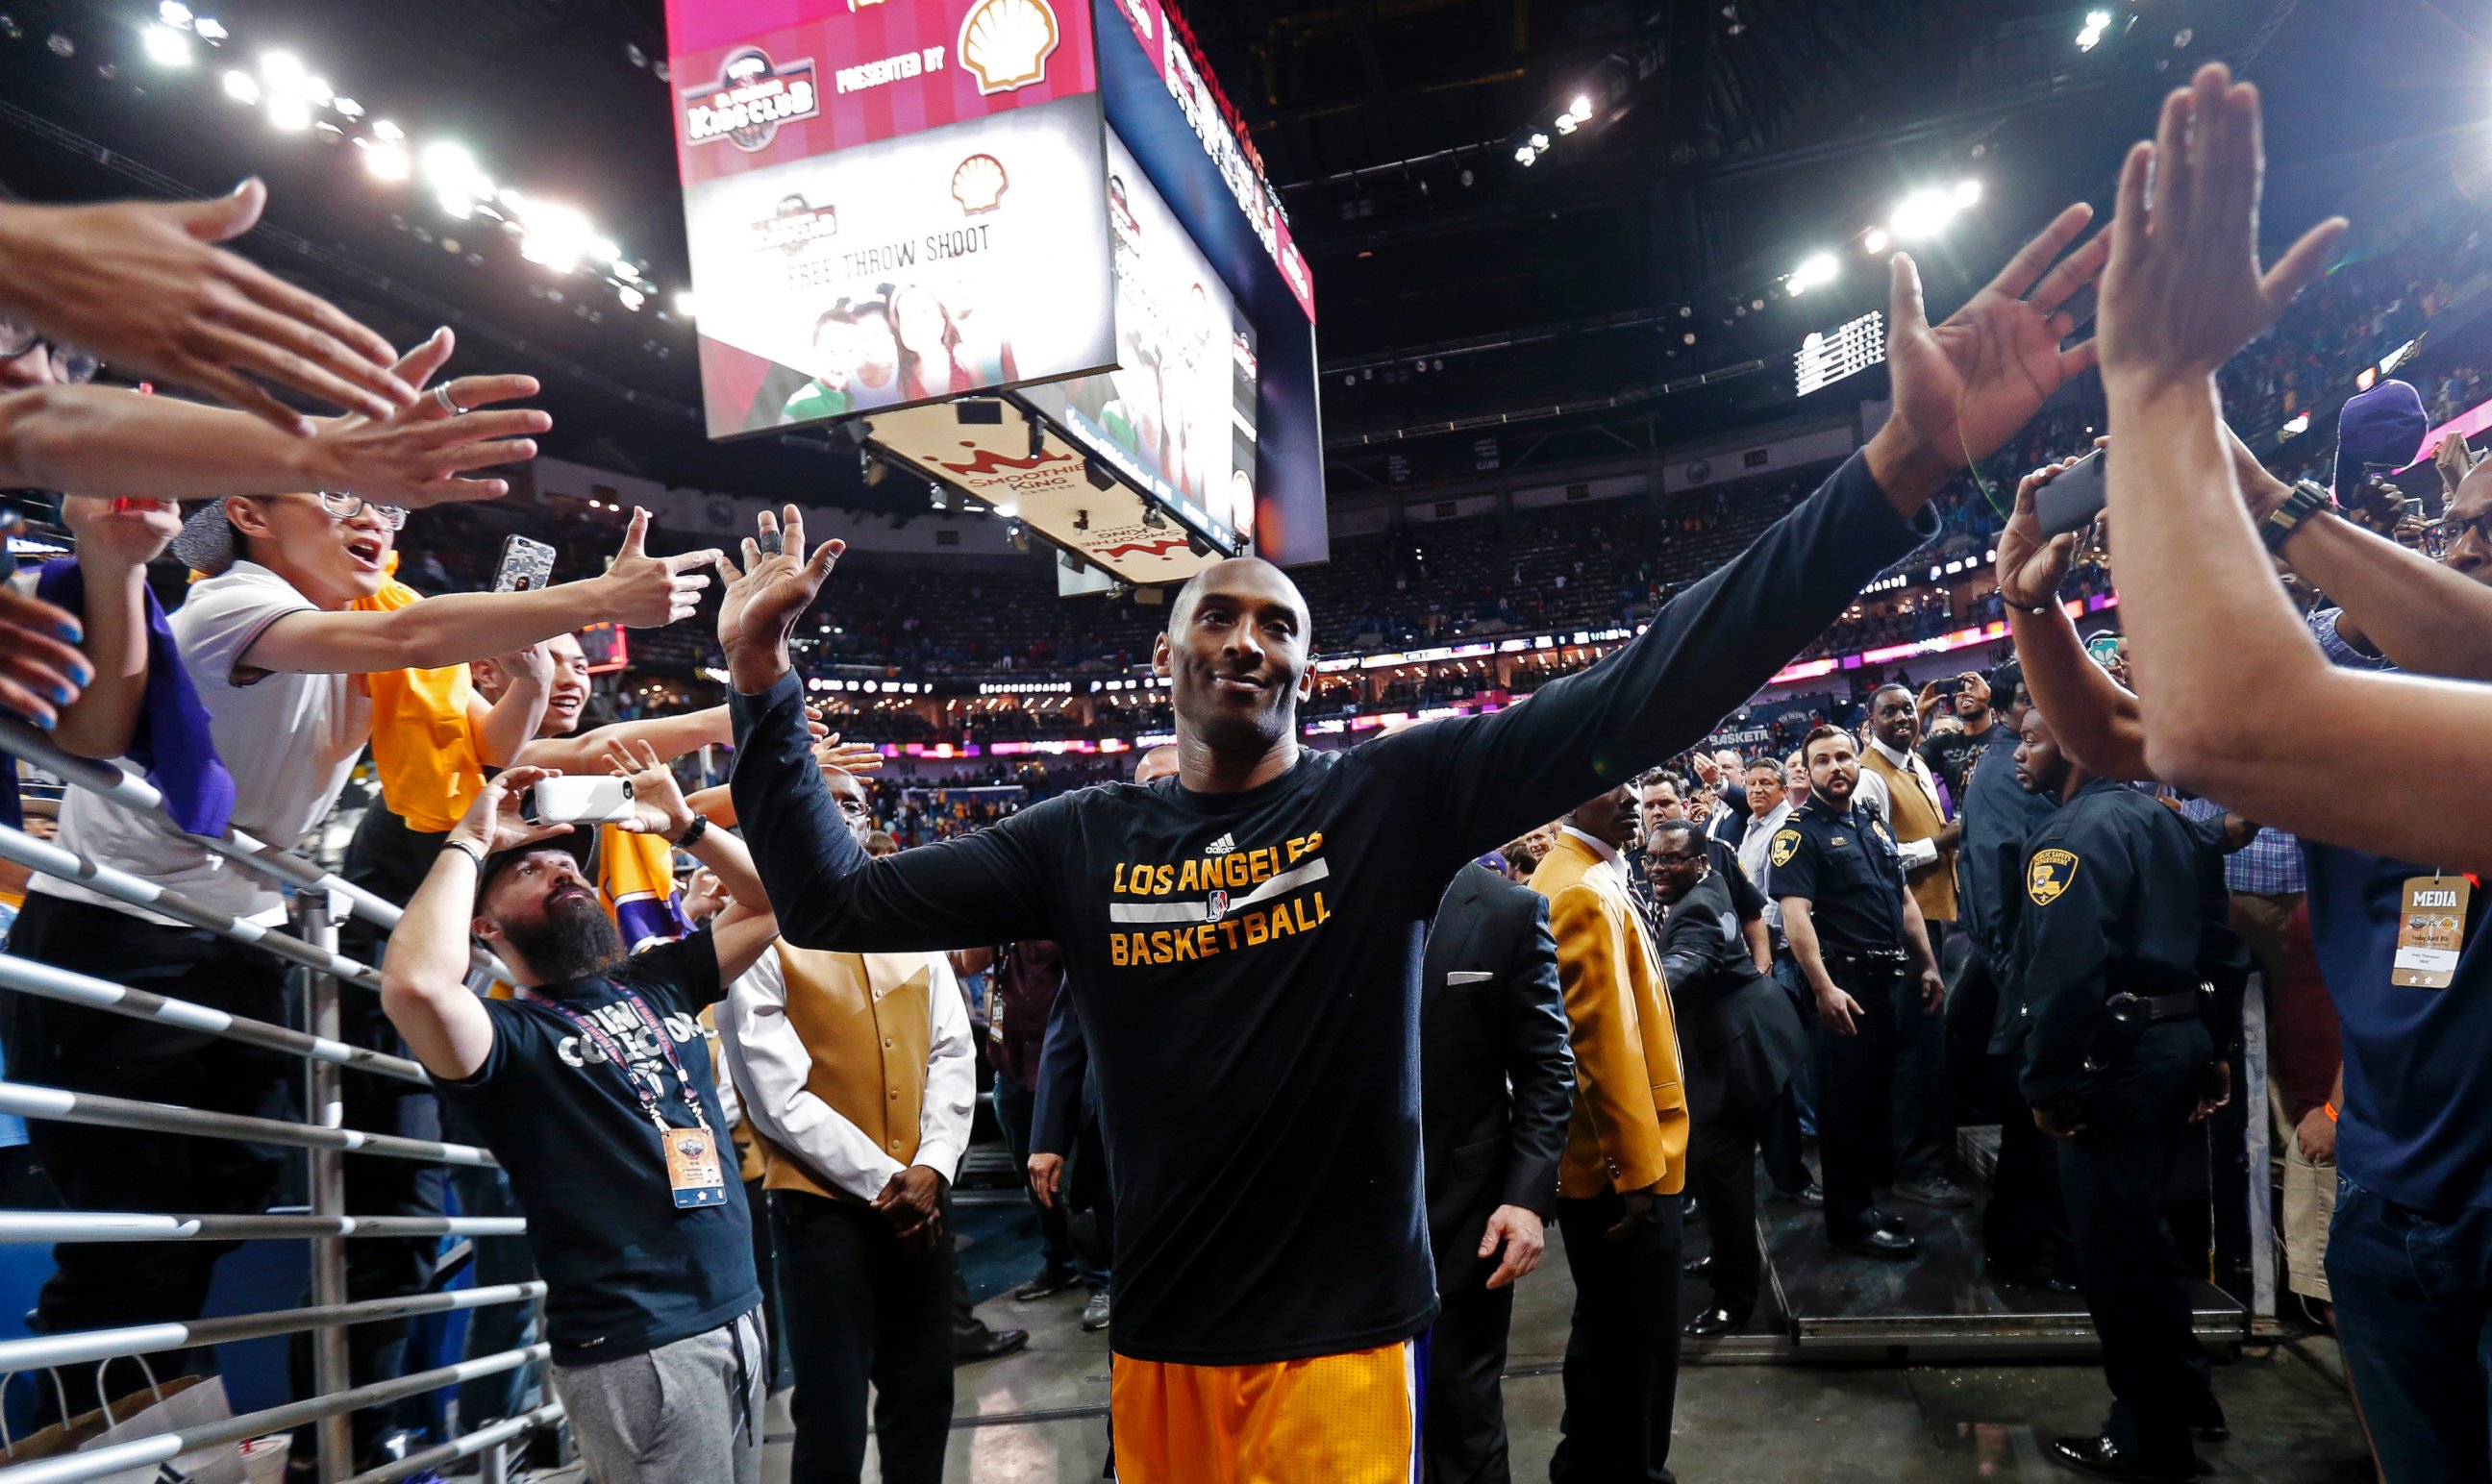 Los Angeles Lakers forward Kobe Bryant greets fans as he leaves the court after the team's NBA basketball game against the New Orleans Pelicans in New Orleans, April 8, 2016. 